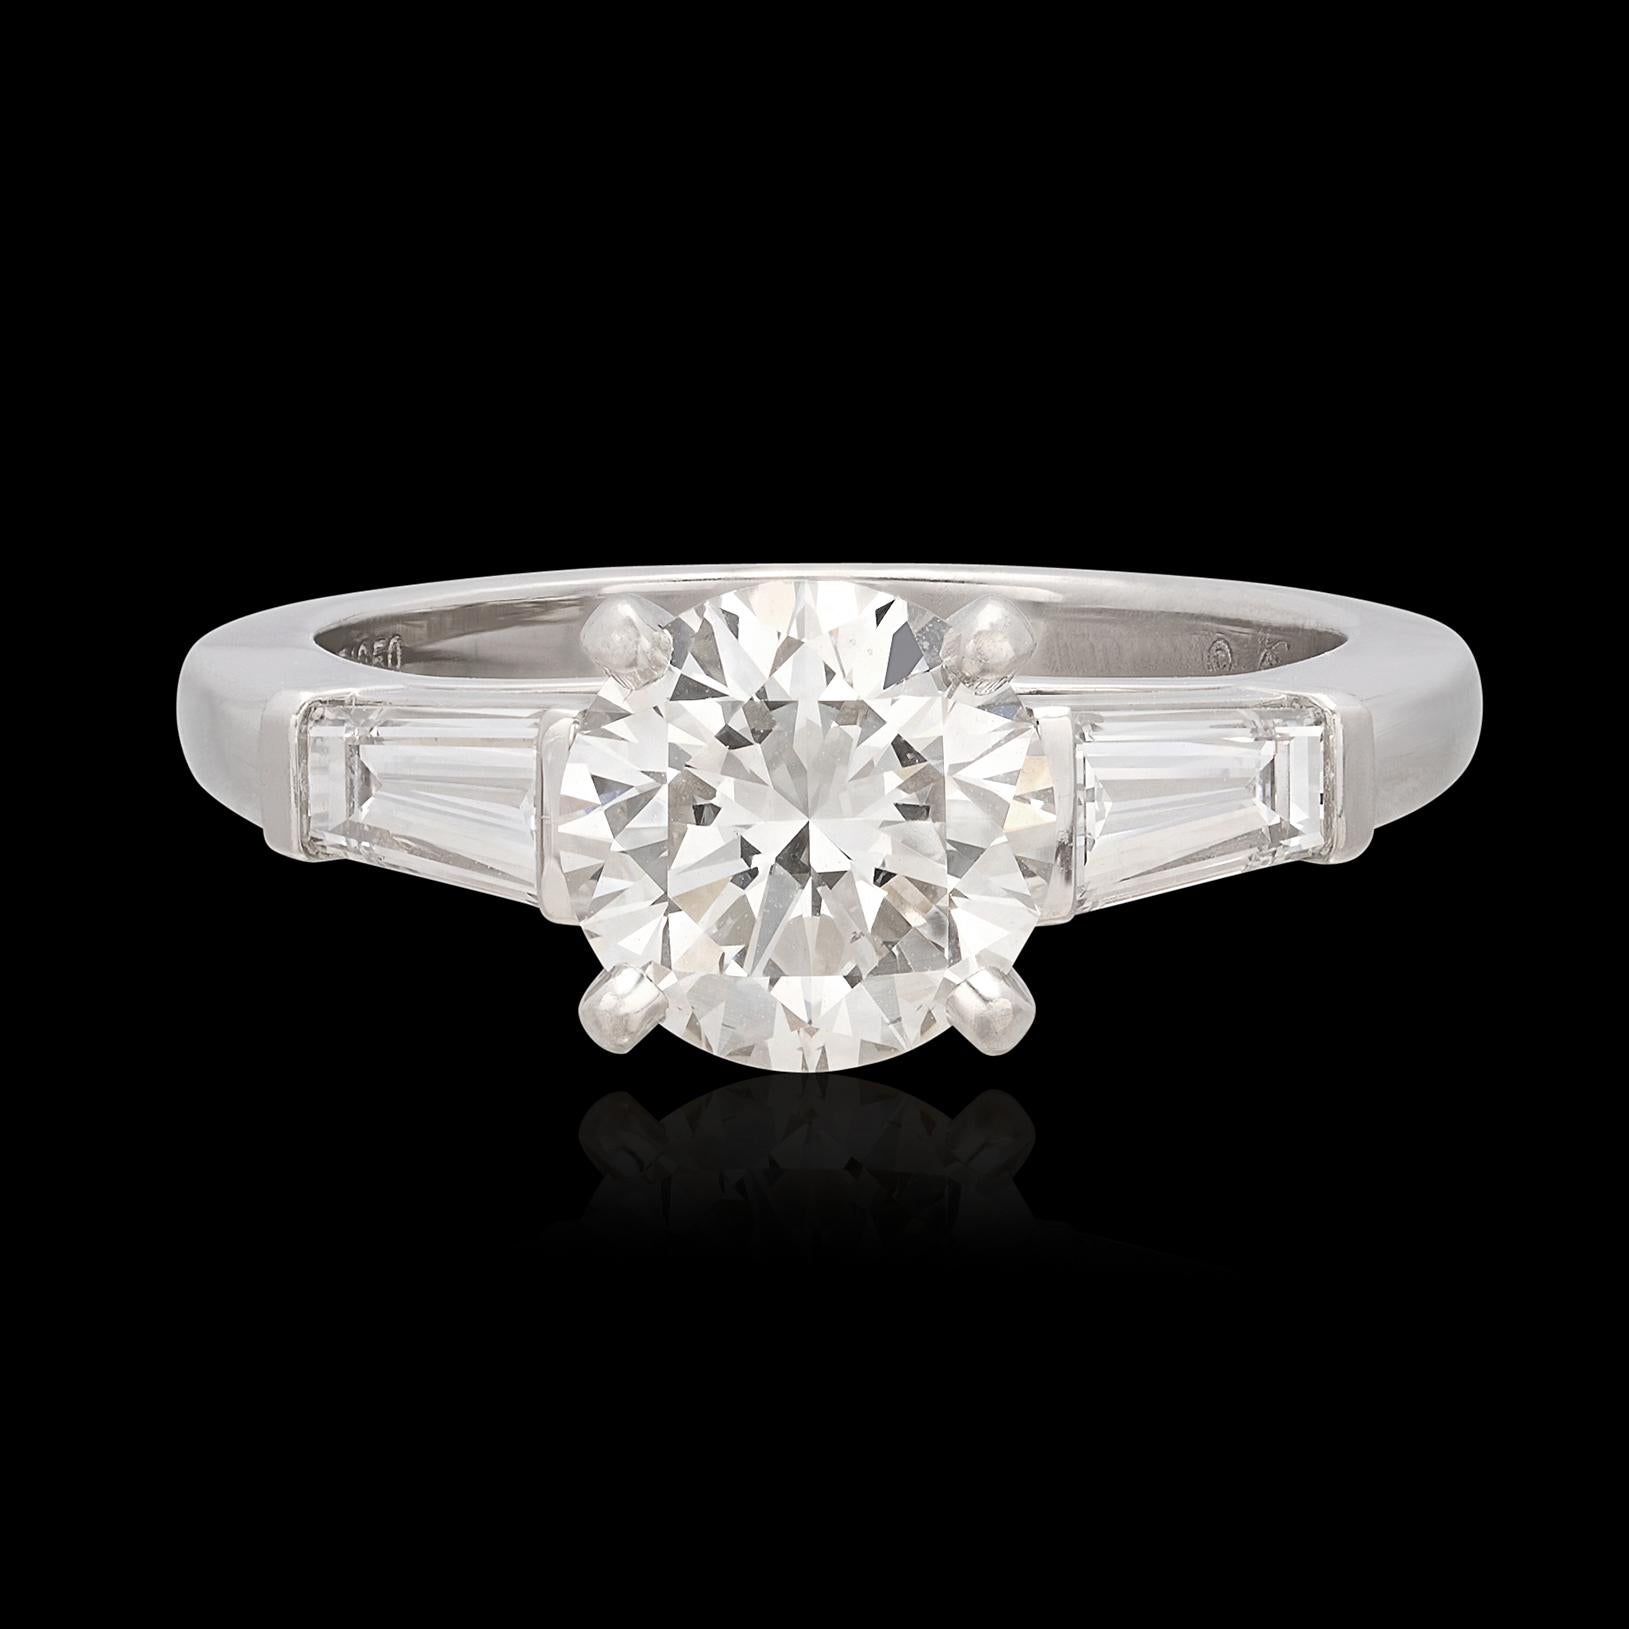 Look no further. Brilliant and sparkling, this Cartier platinum engagement ring may just be the perfect engagement ring. Featuring a round brilliant-cut diamond weighing 1.51 carats, GIA graded H/VS1, flanked by two tapered baguette-cut diamonds,